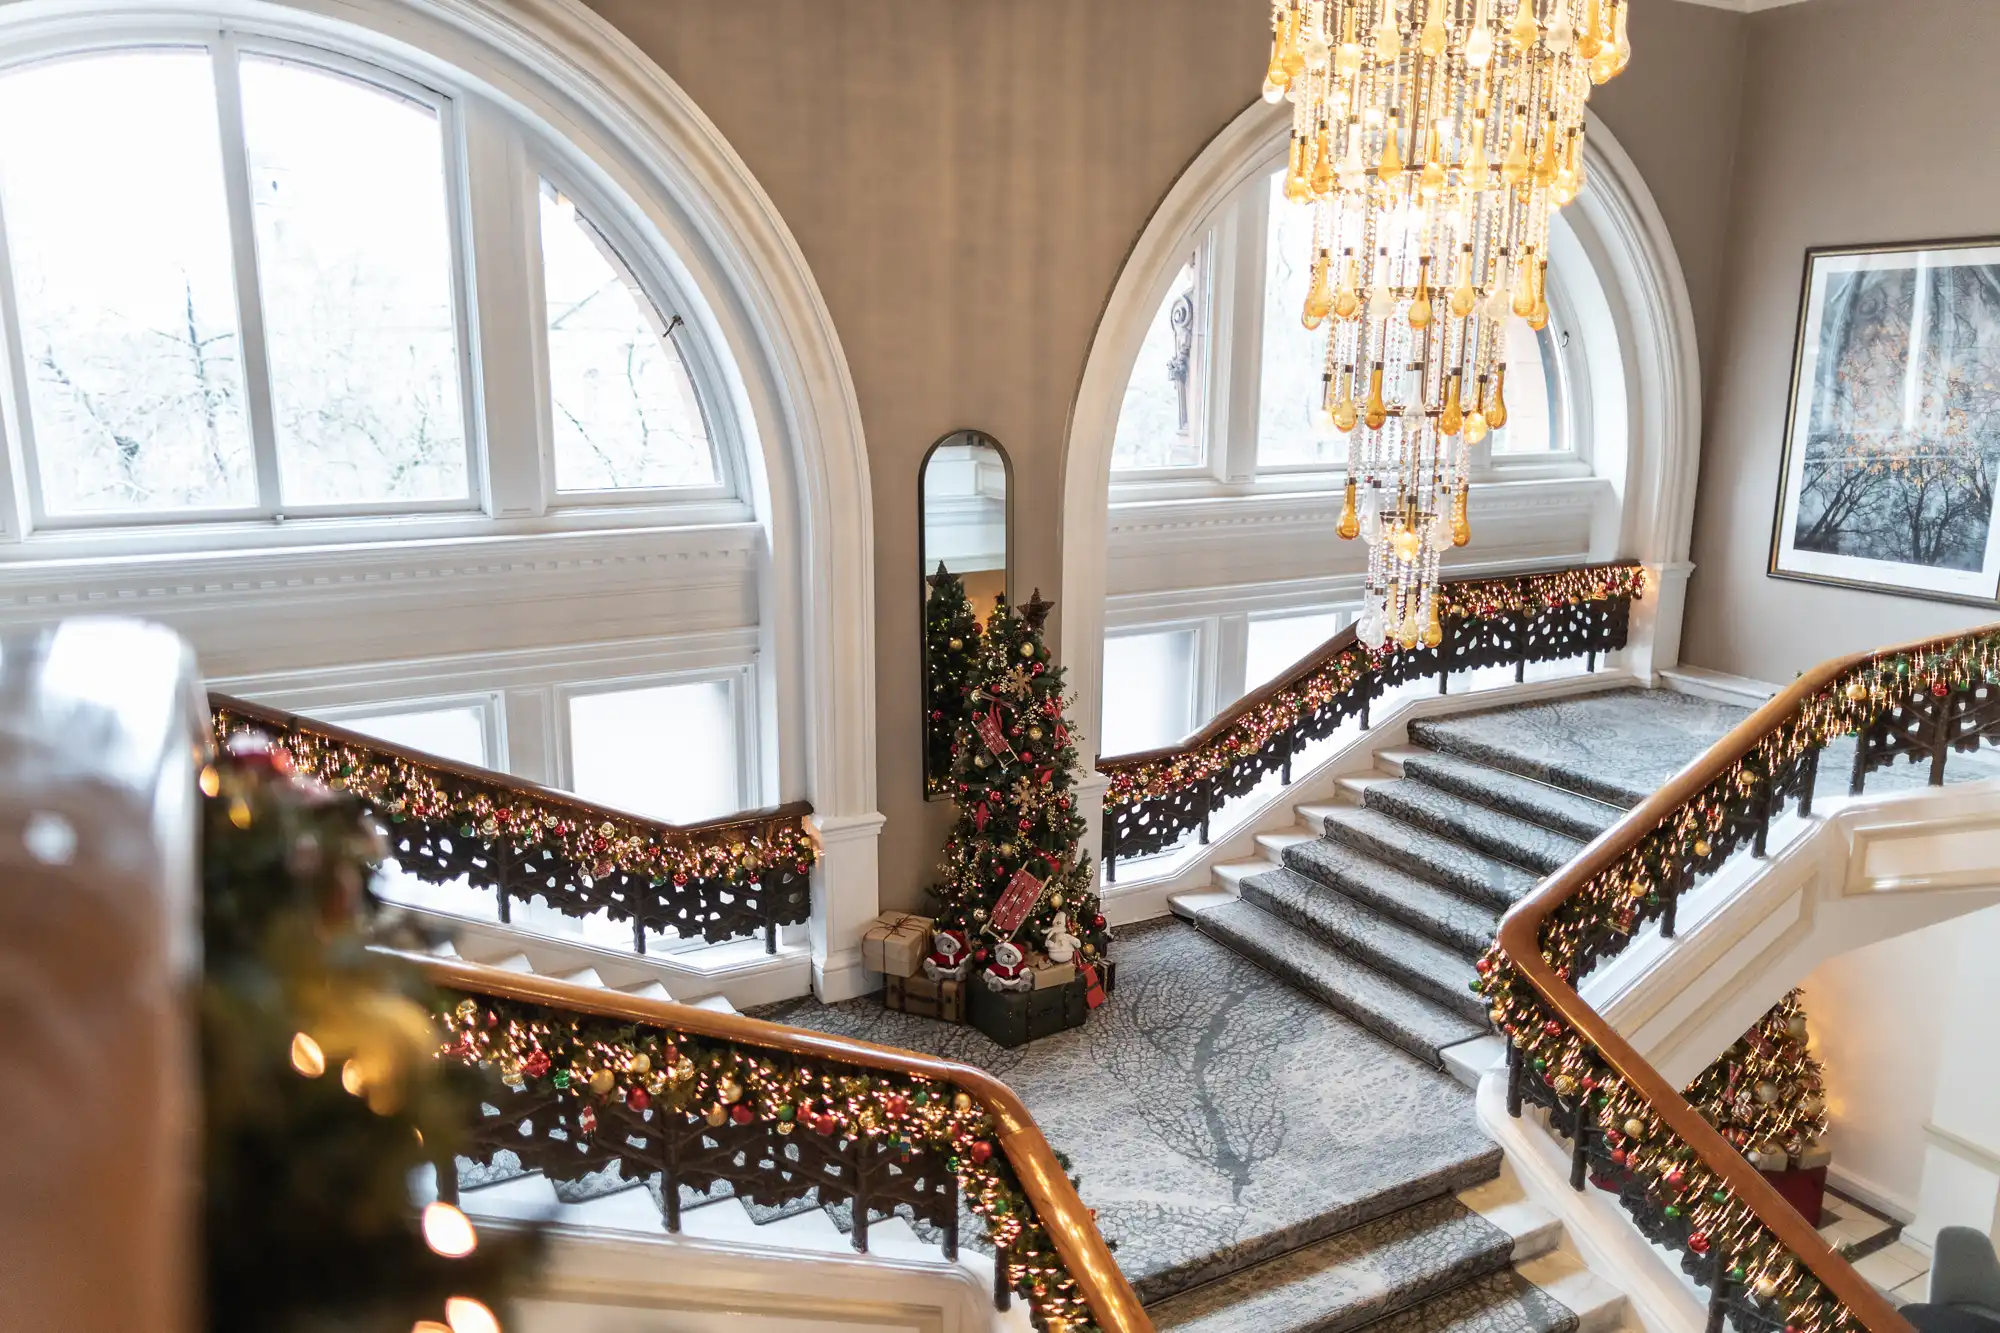 A grand staircase decorated with garlands and lights, featuring a large central window, chandelier, and a Christmas tree at the base, inside an elegant interior space.